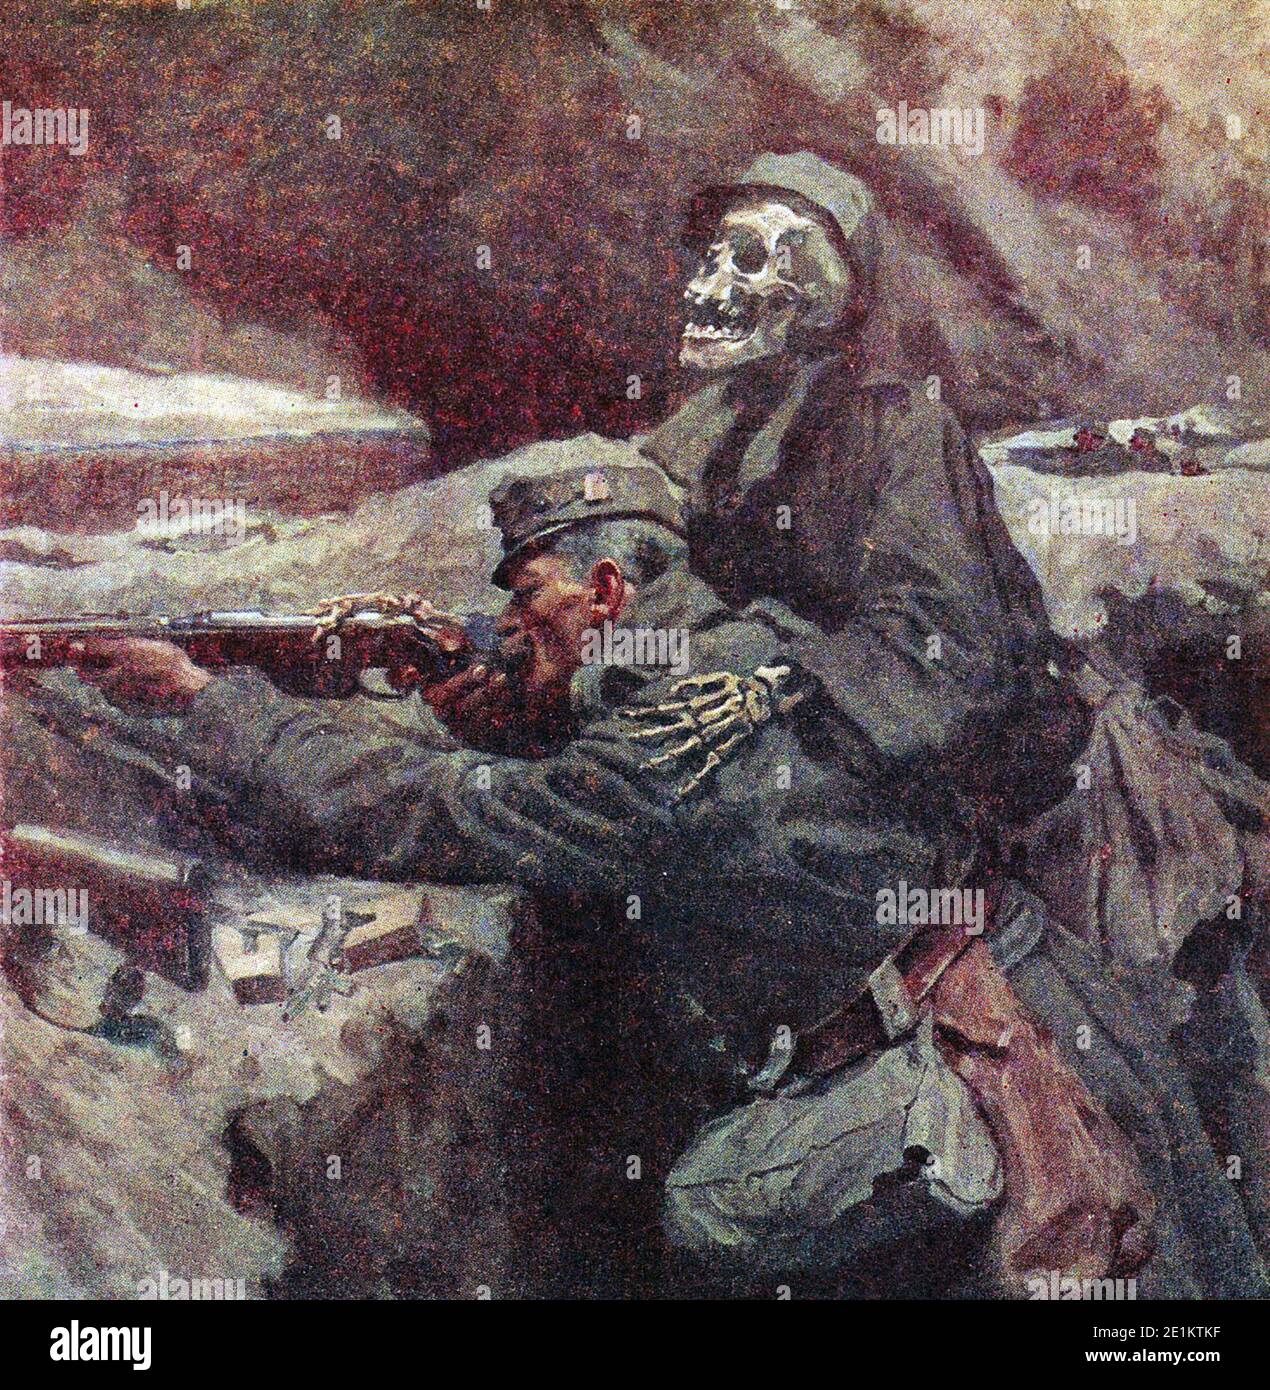 Vintage illustration of World War I. Hugarian soldier and death in trench. 1917 Stock Photo